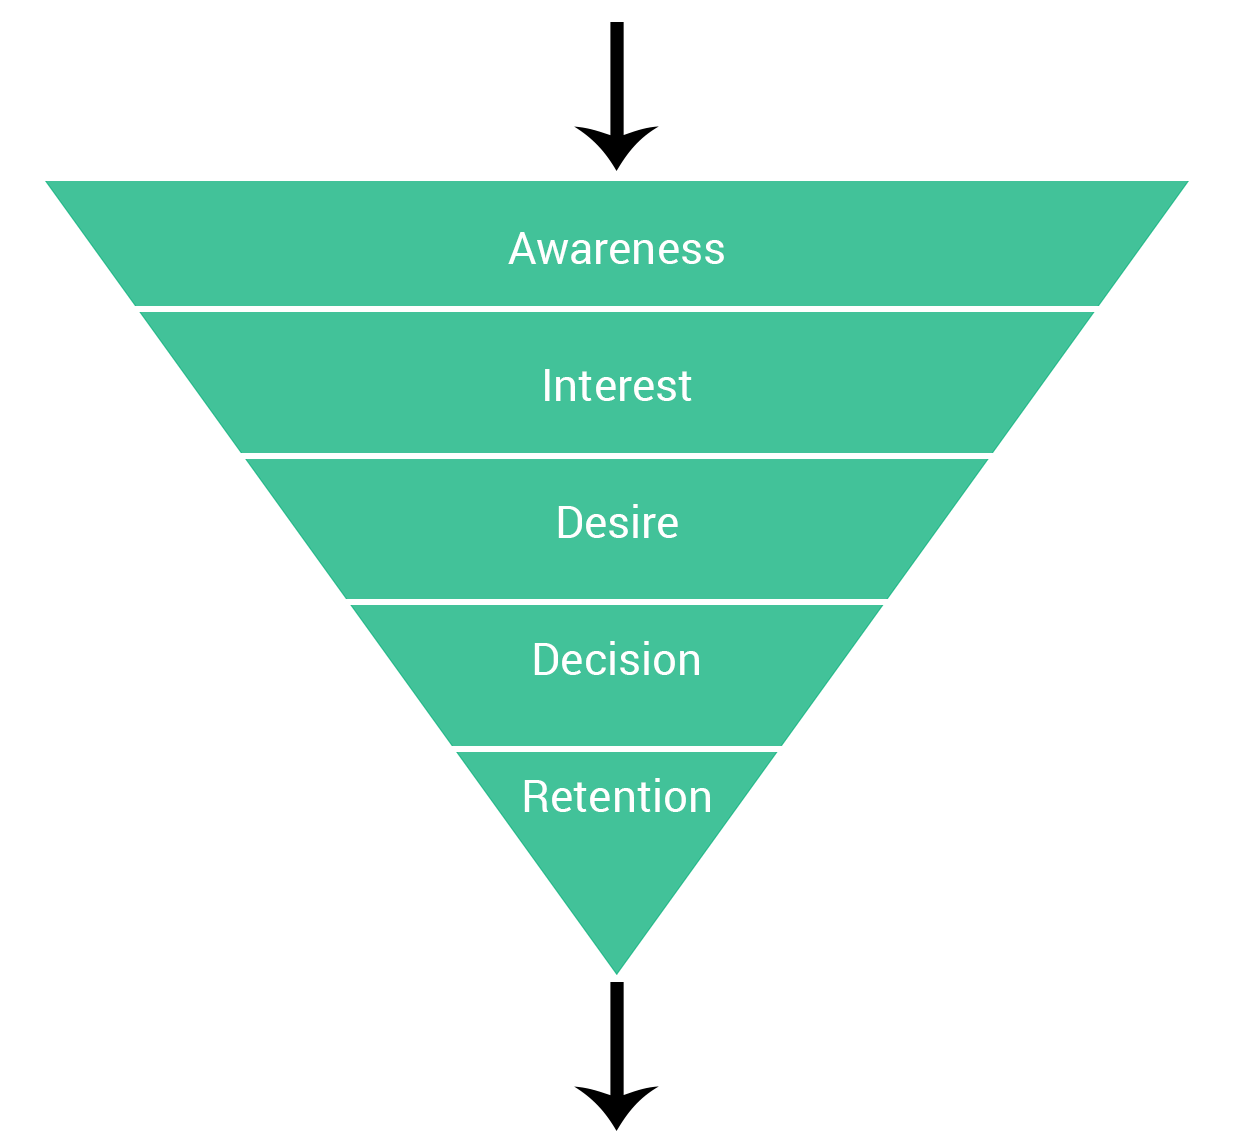 The traditional marketing funnel worked for a while, but won't be so effective in 2018